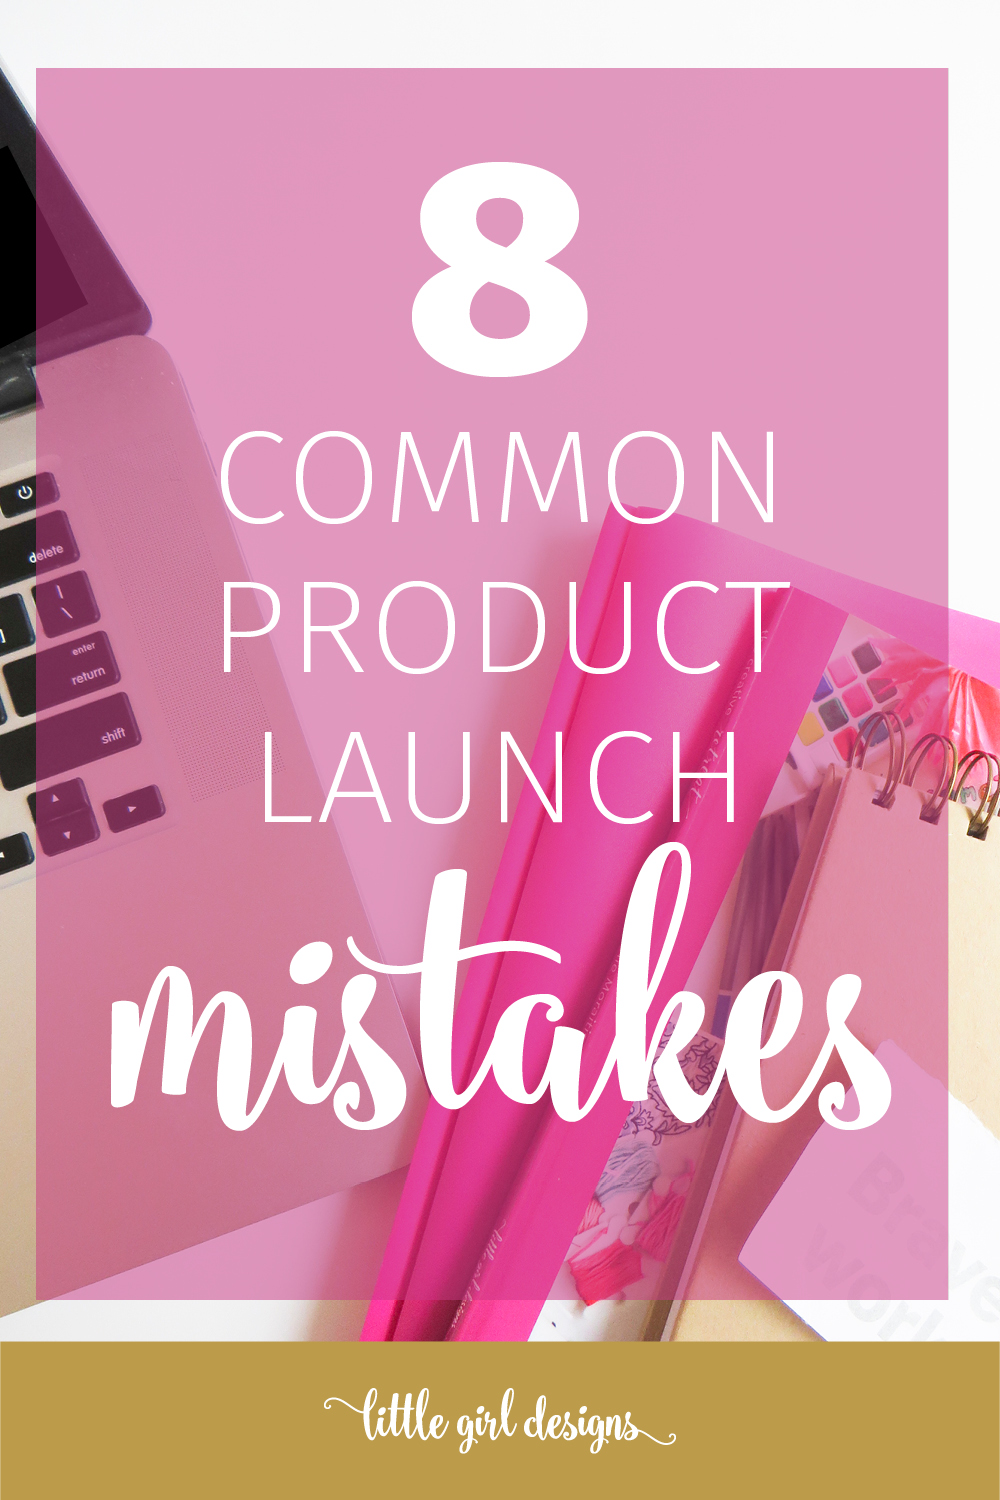 Do you want to launch a product? Don't make these mistakes! If you're a blogger who wants to make money online, you might be thinking about launching a product. This post will help you build a launch strategy that truly works for you!